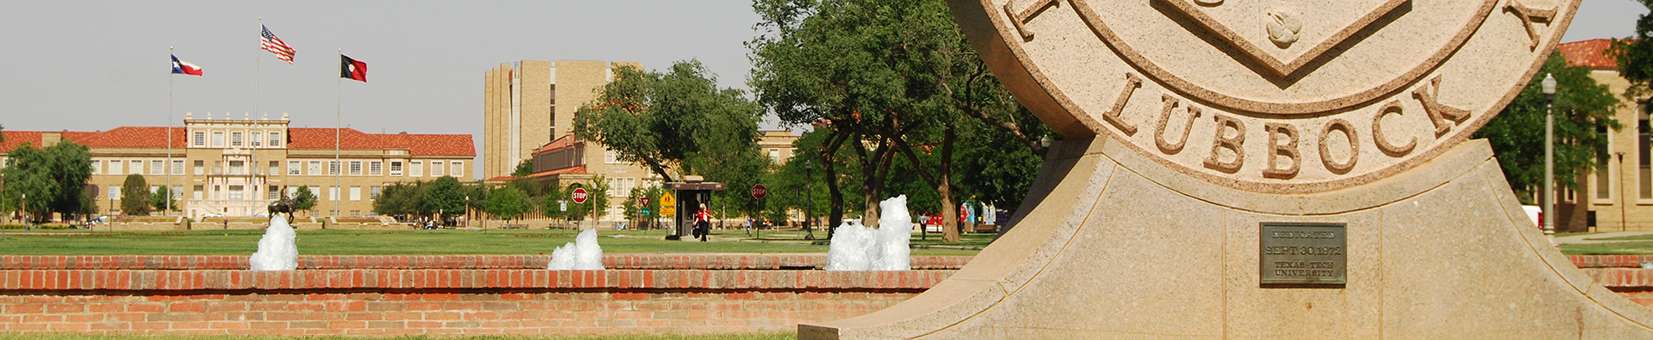 Photo of the University Seal and fountain